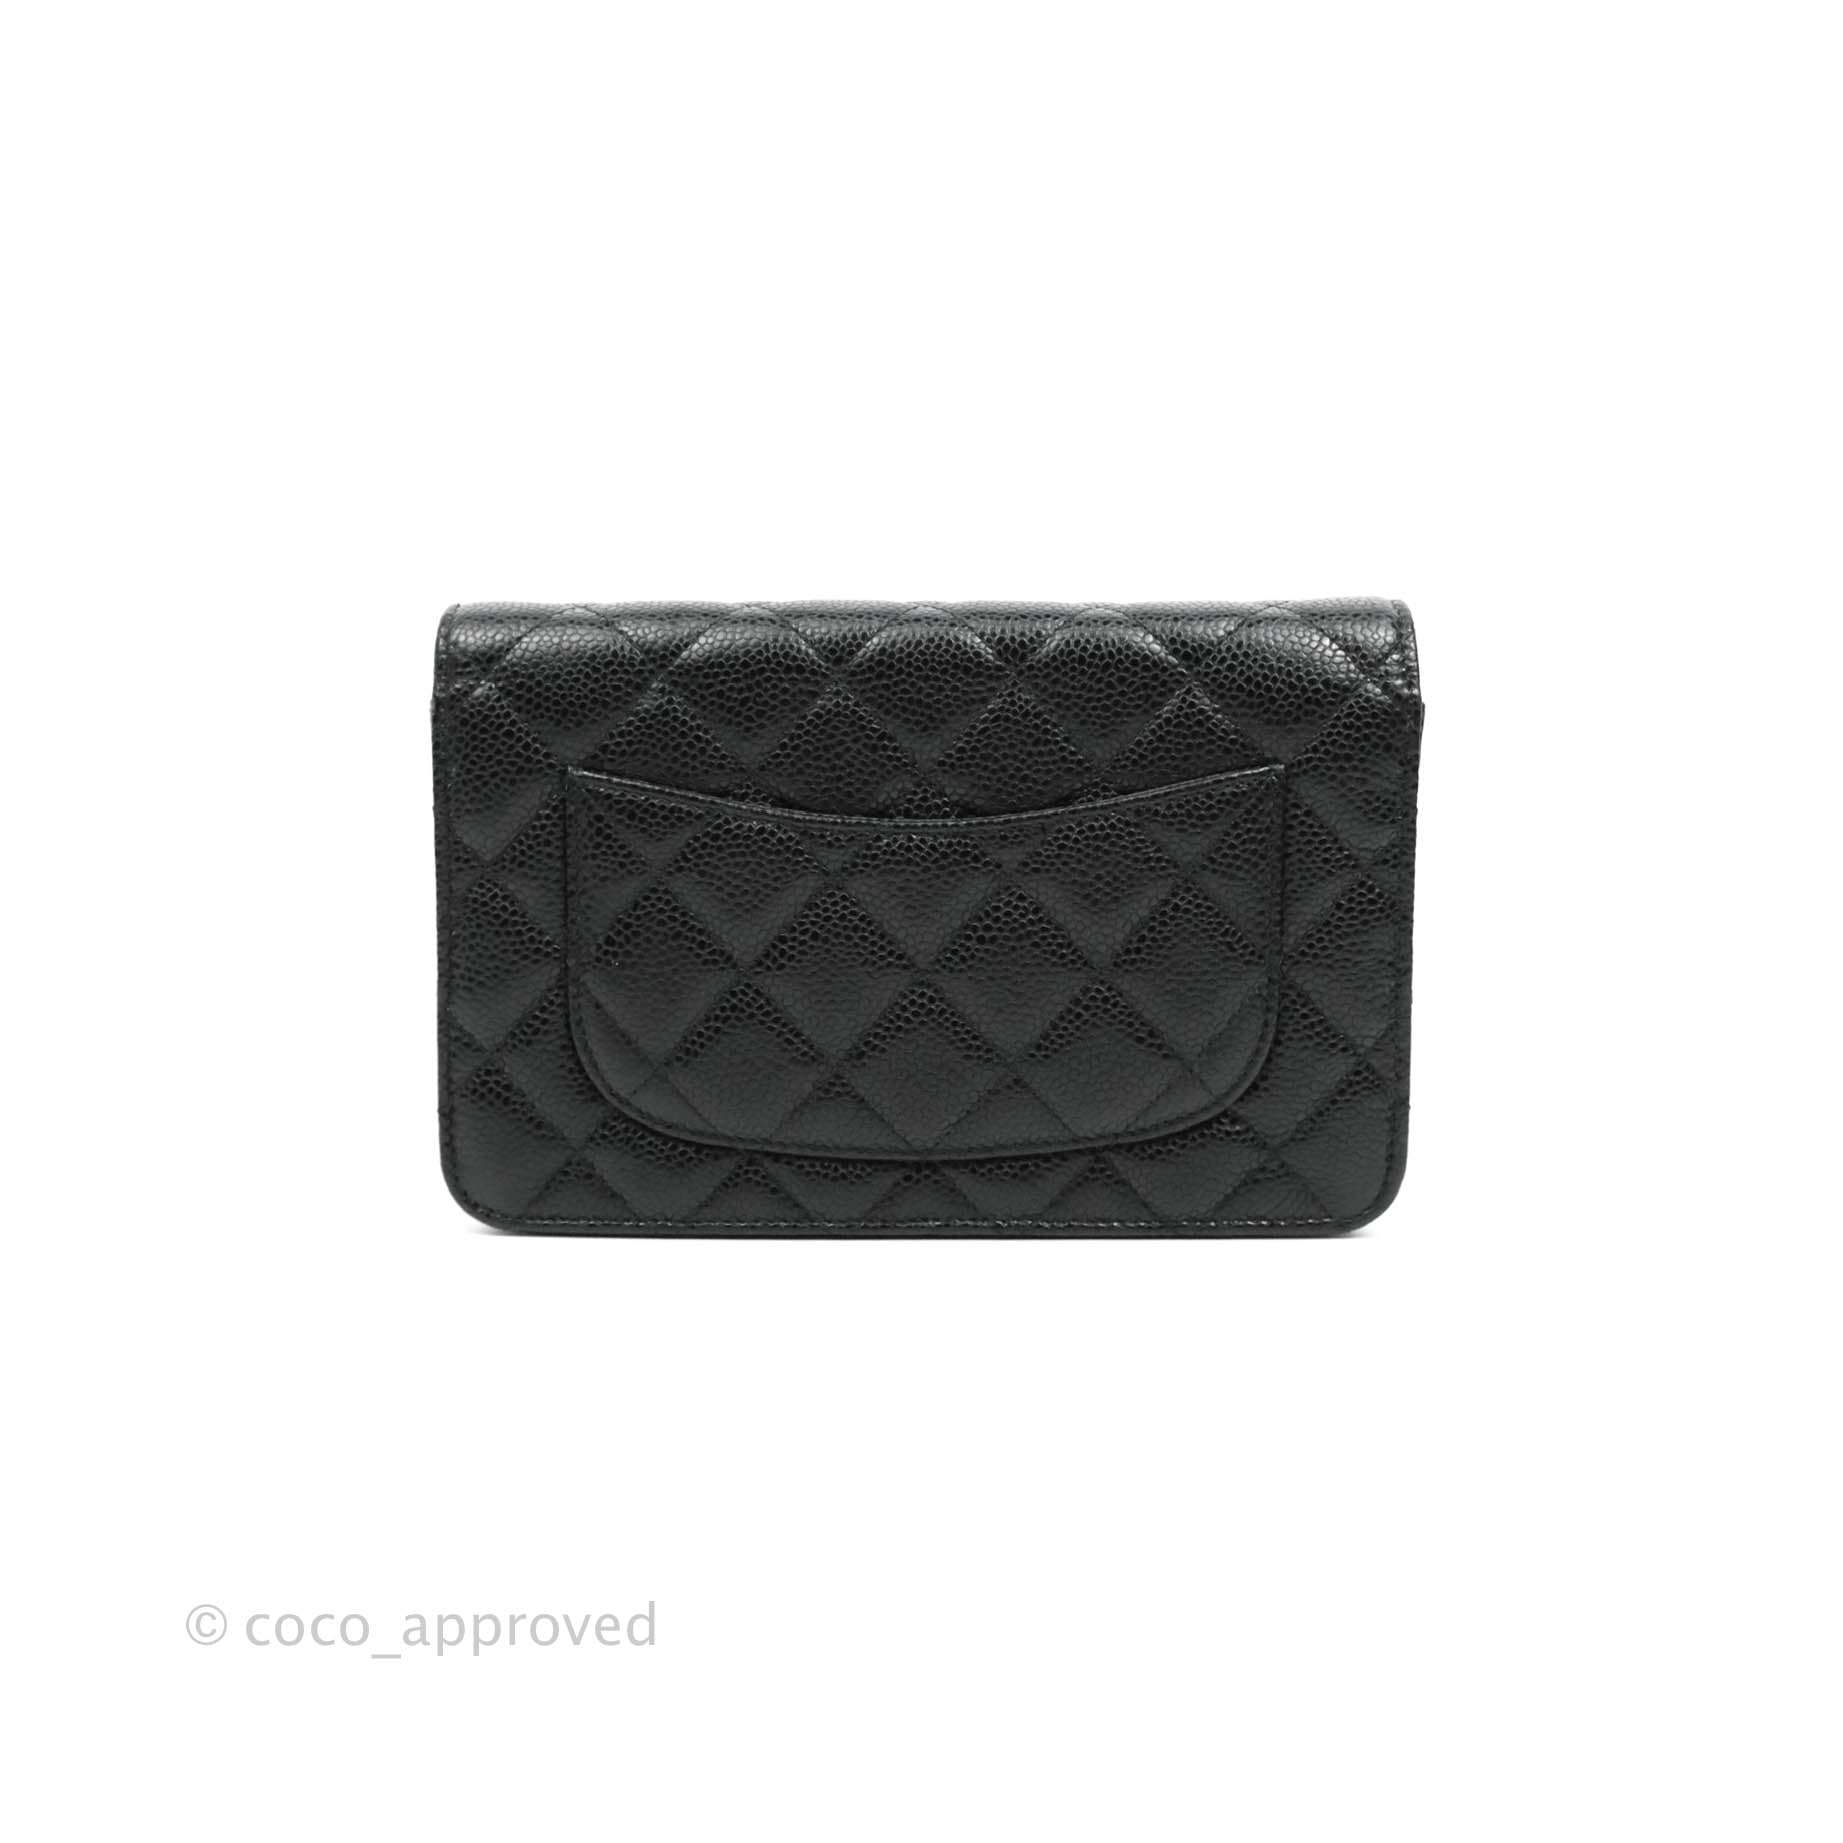 CHANEL WOC Black Bags & Handbags for Women for sale